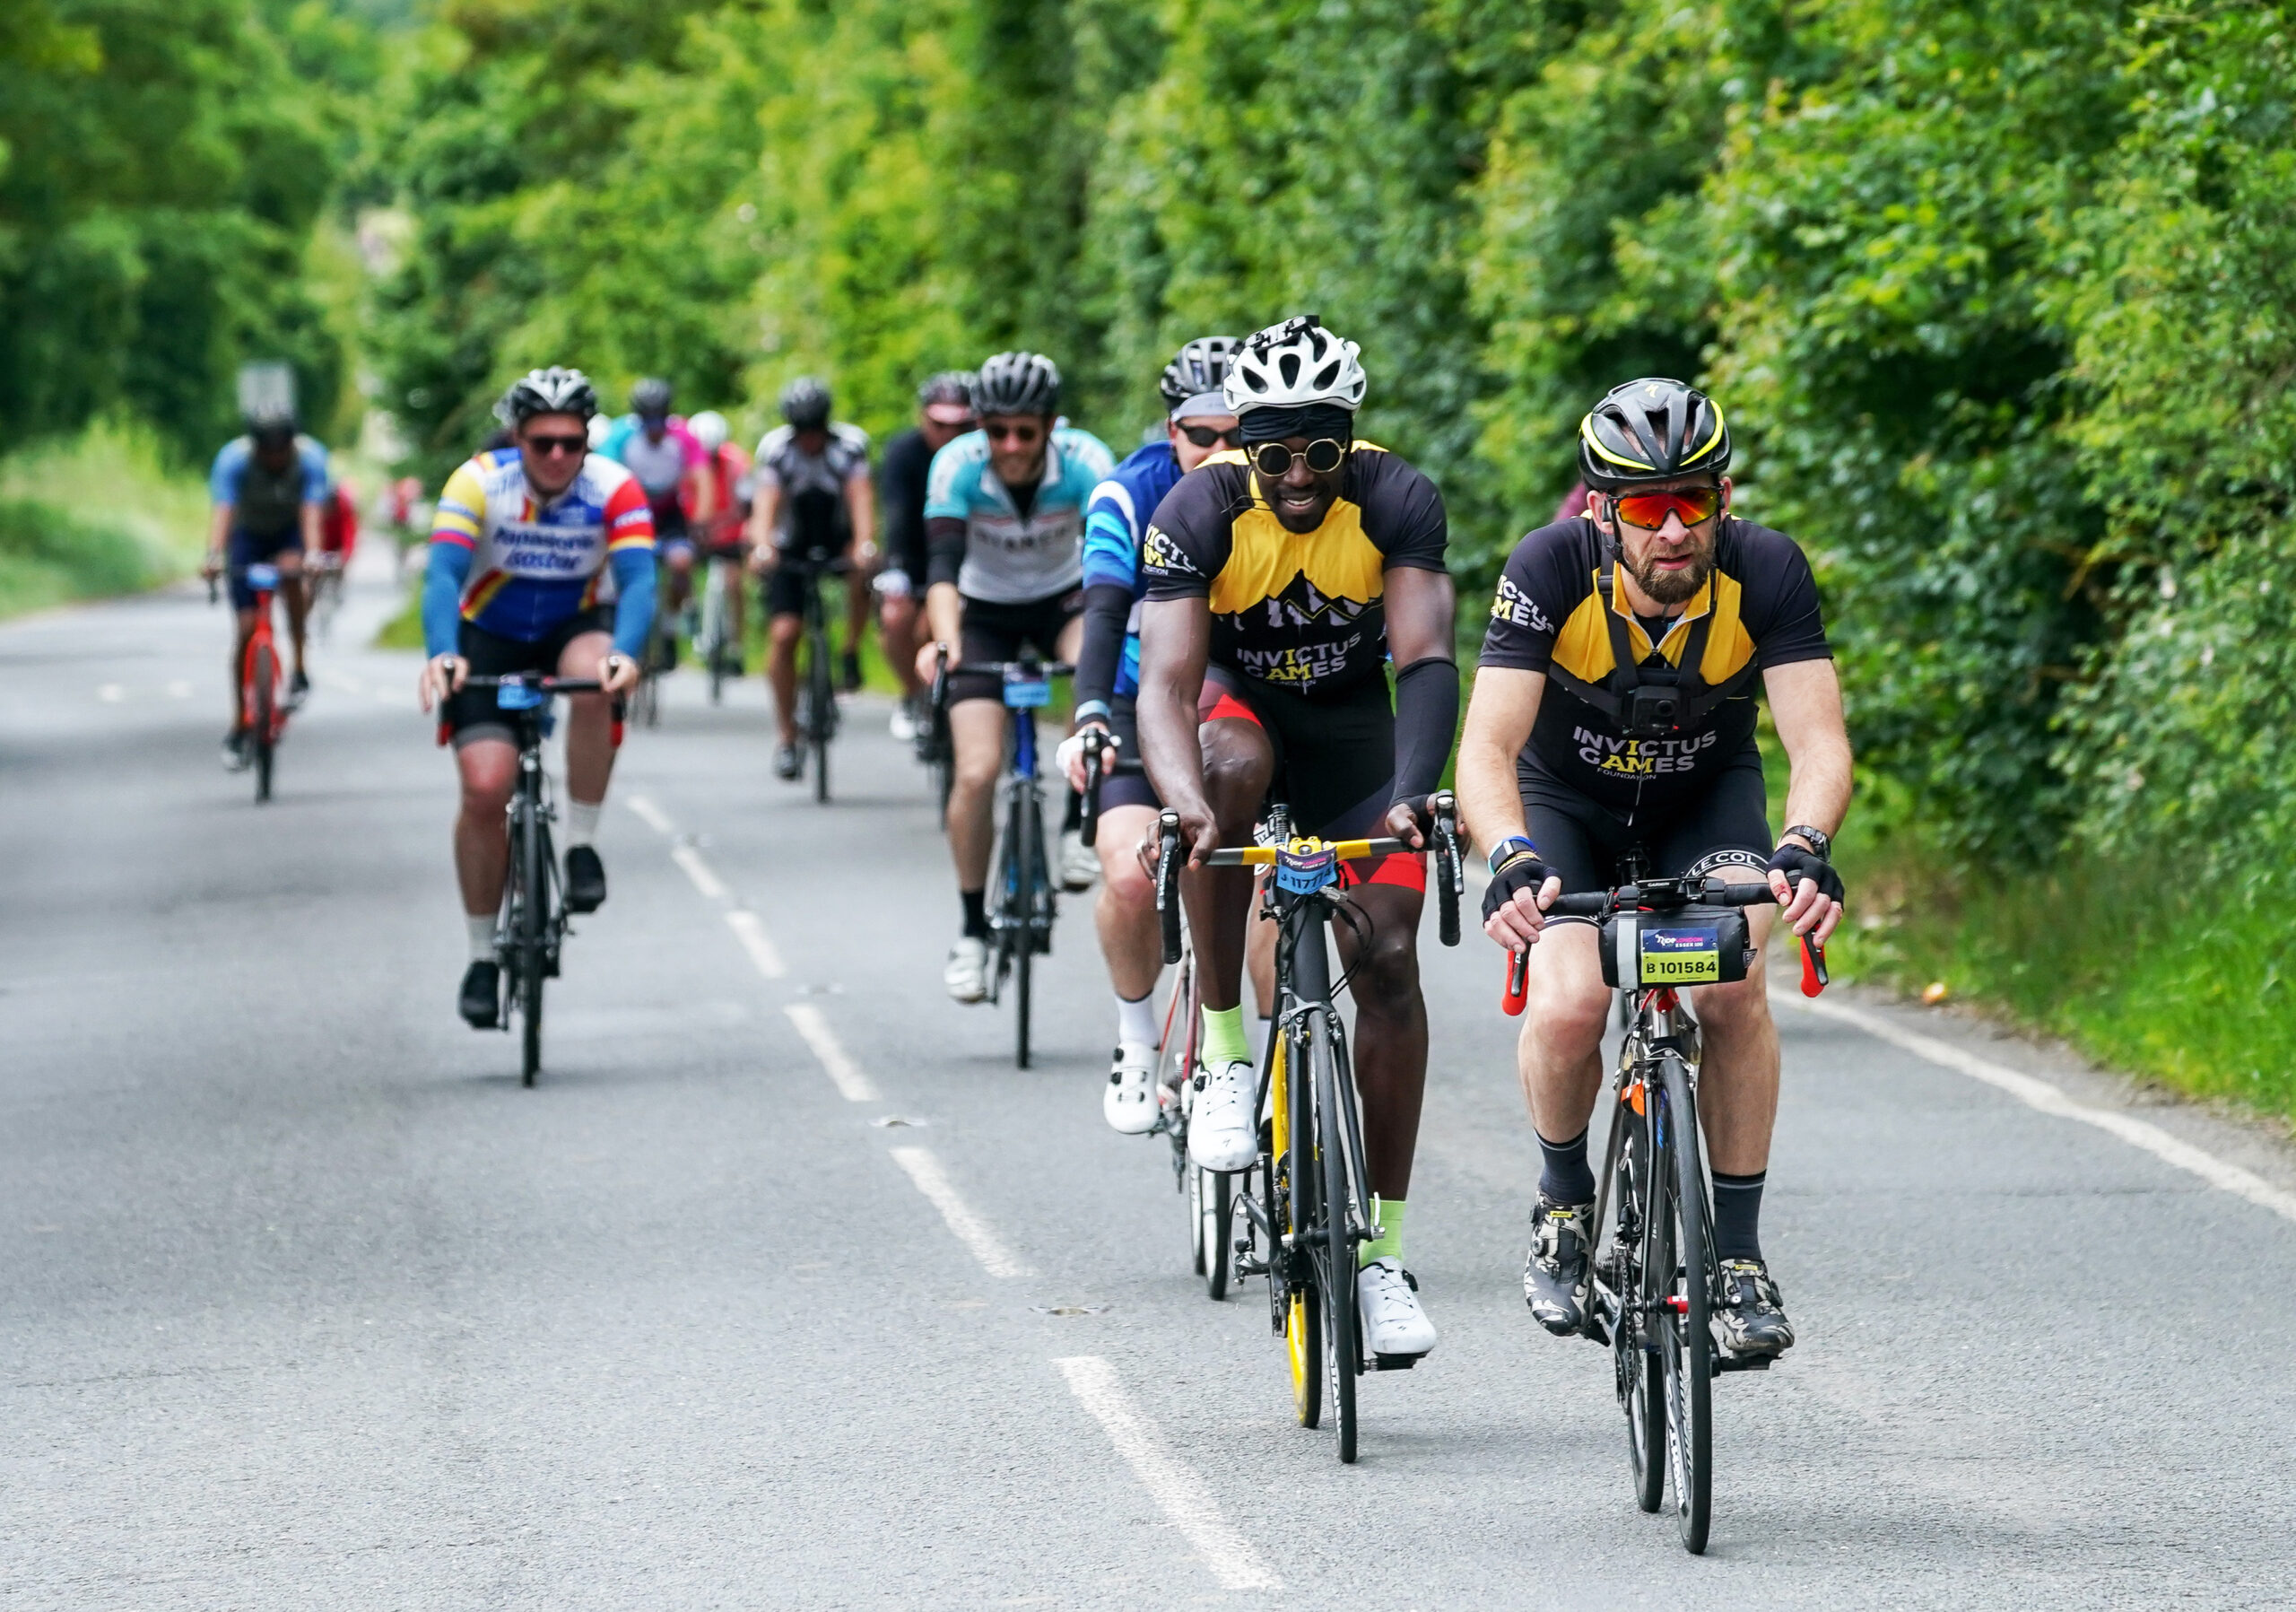 Fundraisers cycling in Essex.